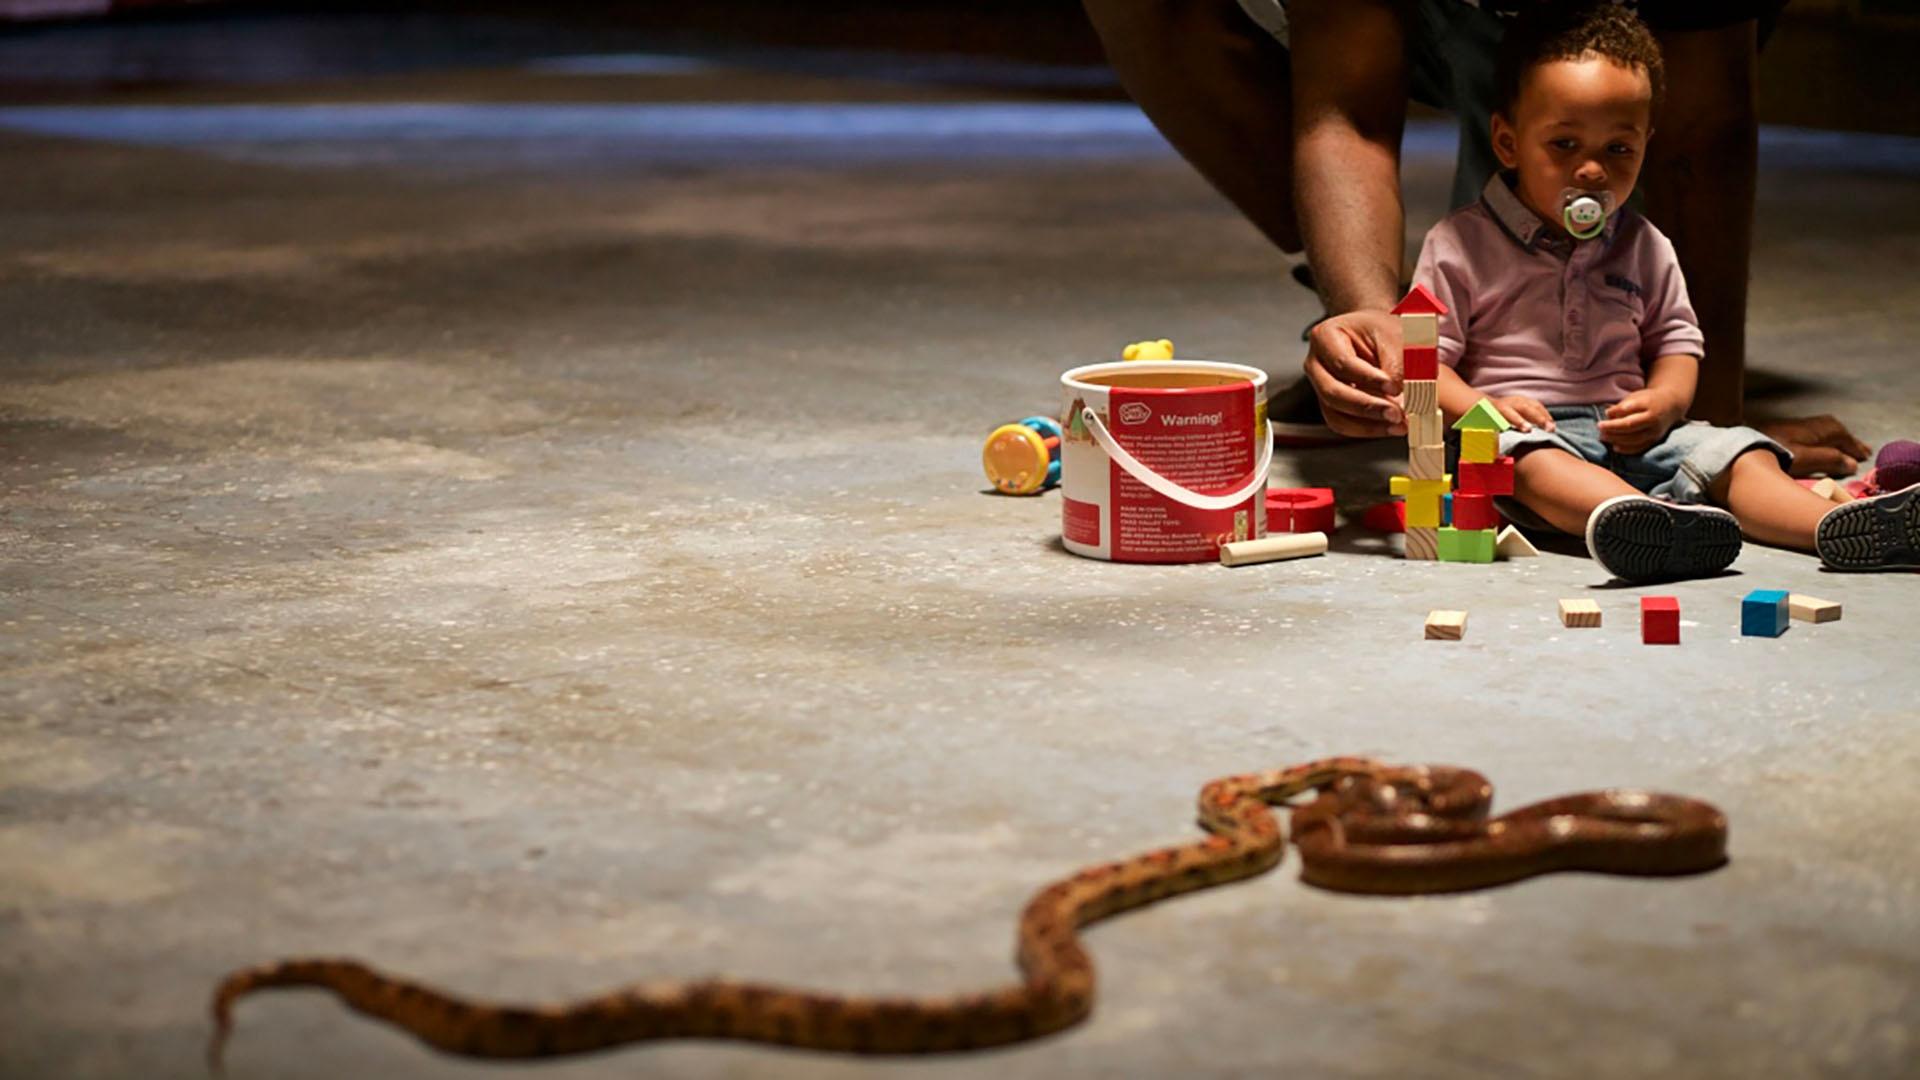 A young boy looks worried as two snakes writhe near his toys.